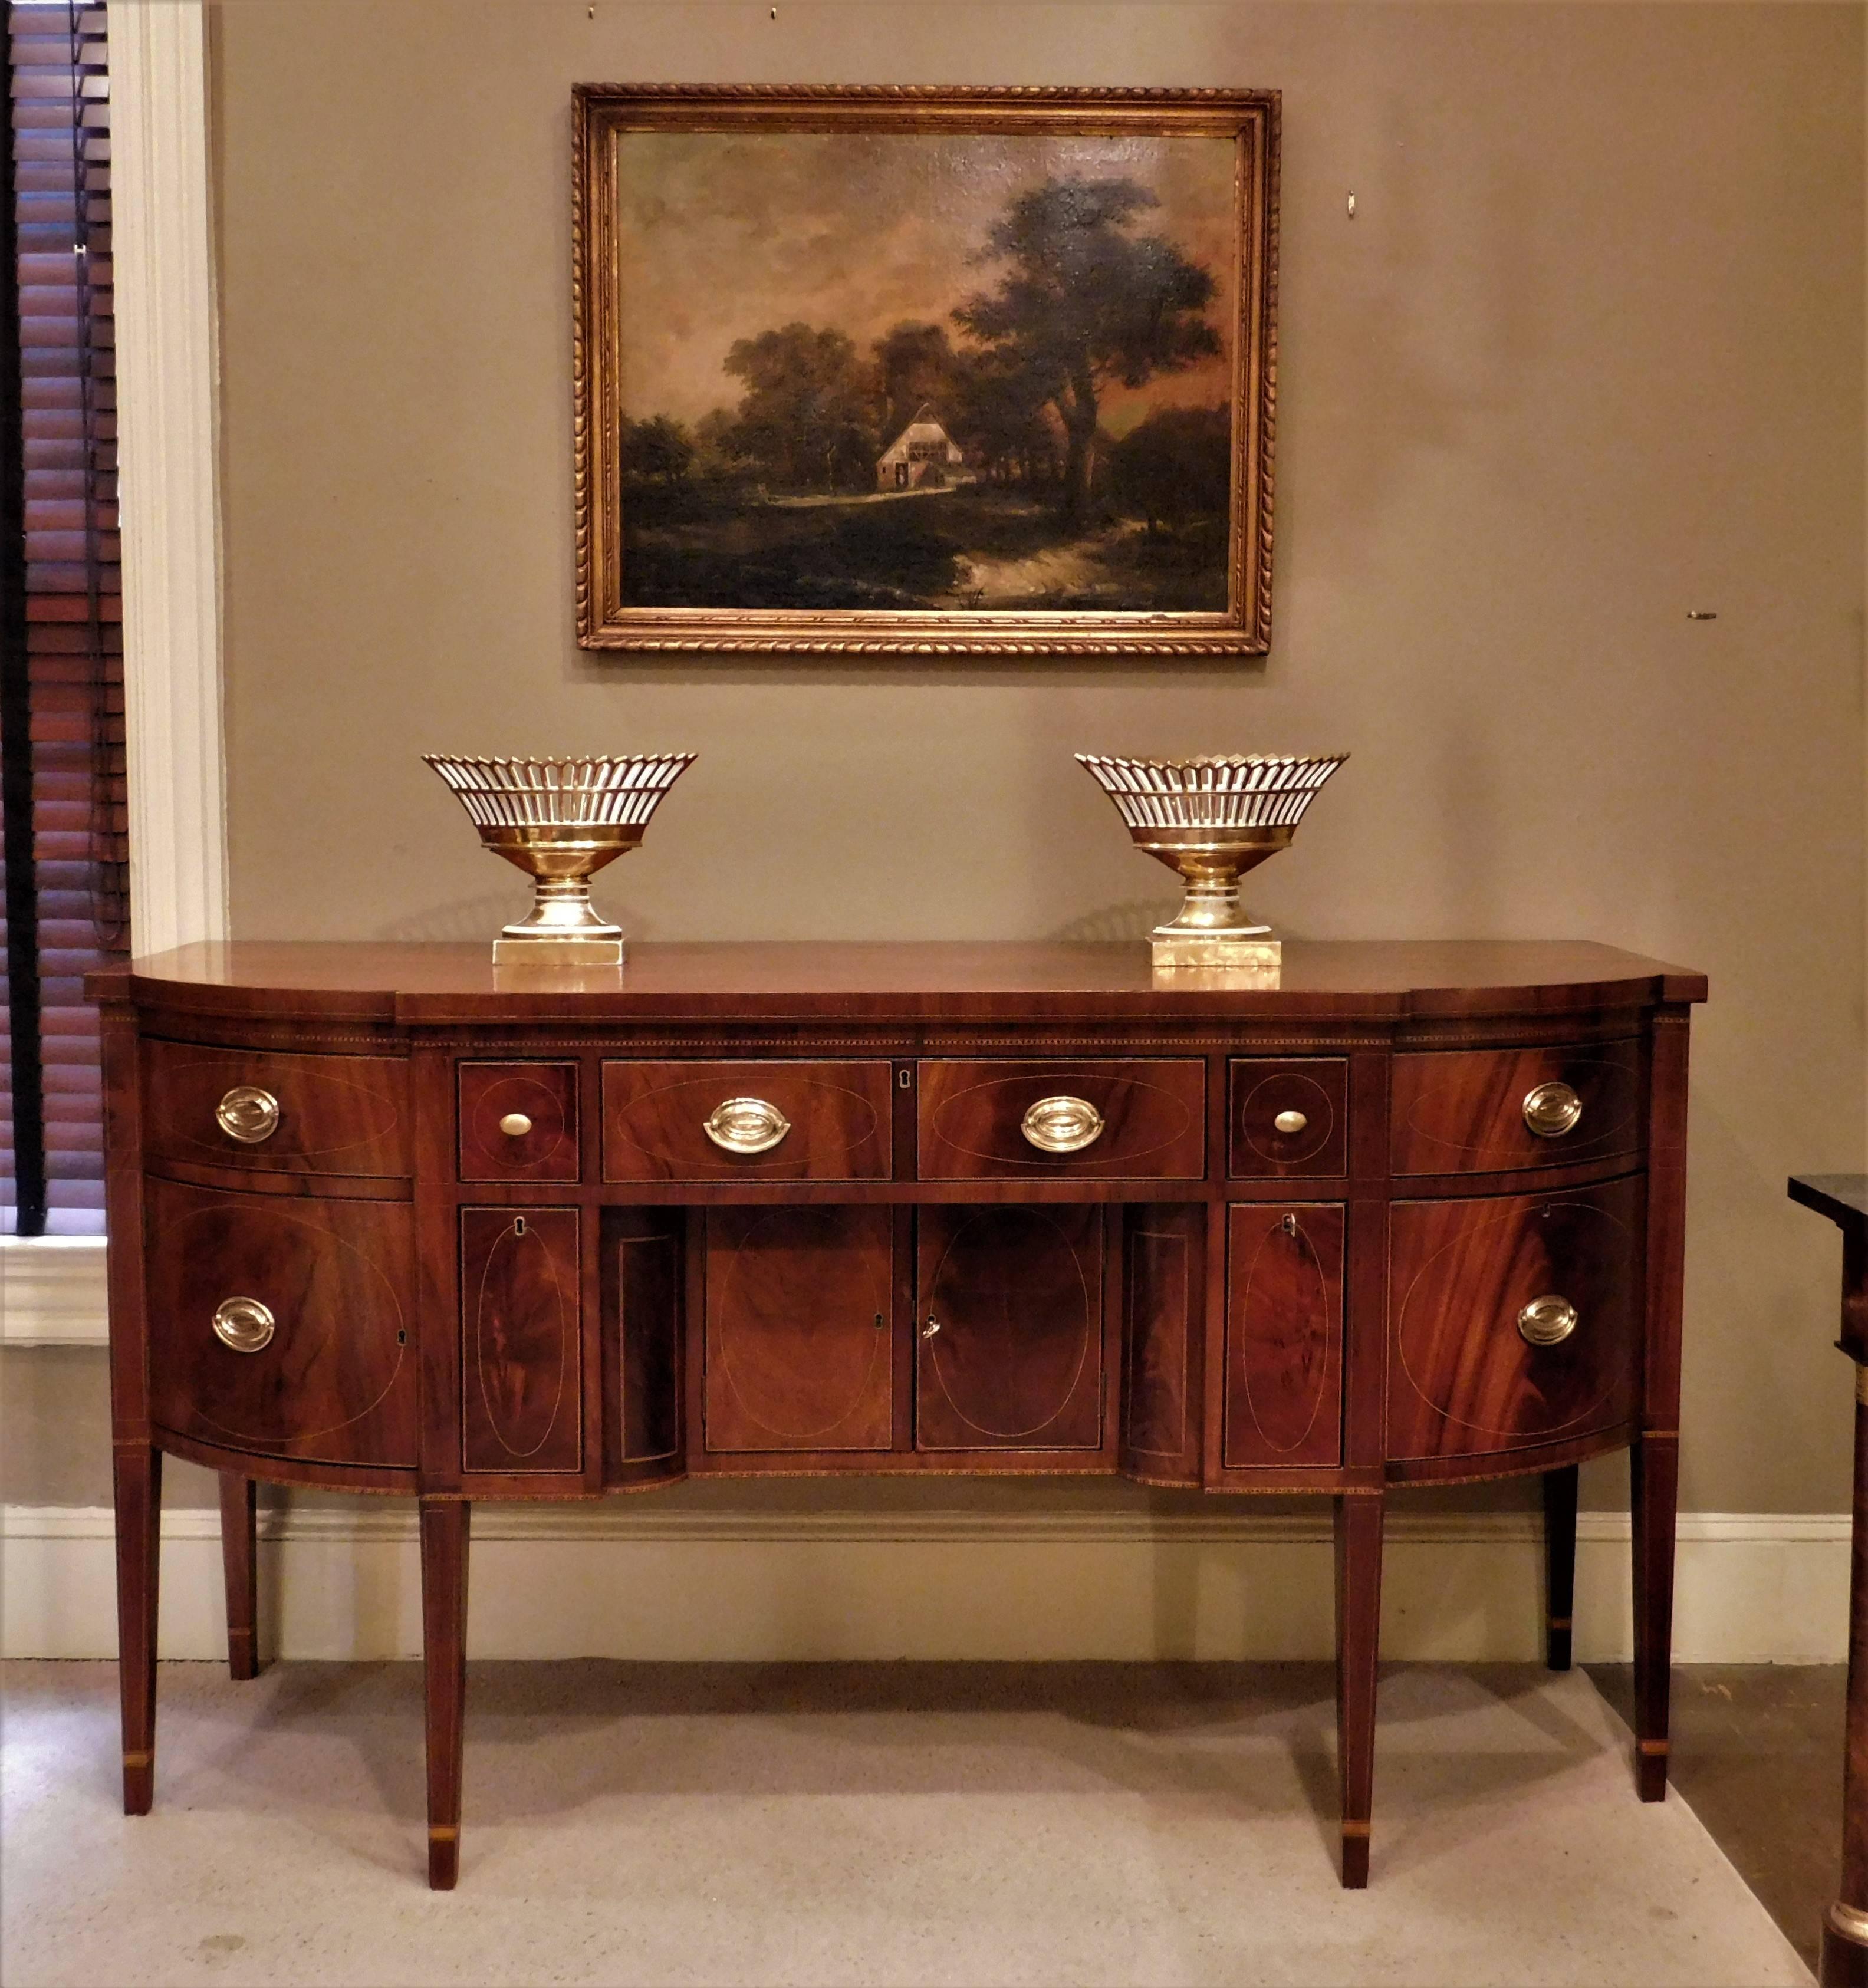 This swell-front Hepplewhite sideboard is mahogany and high figured mahogany with satinwood and ebony inlay and poplar and pine secondary woods. The distinctive and unusual inlay designs included barber pole, arrow, diamond patterns and string. The